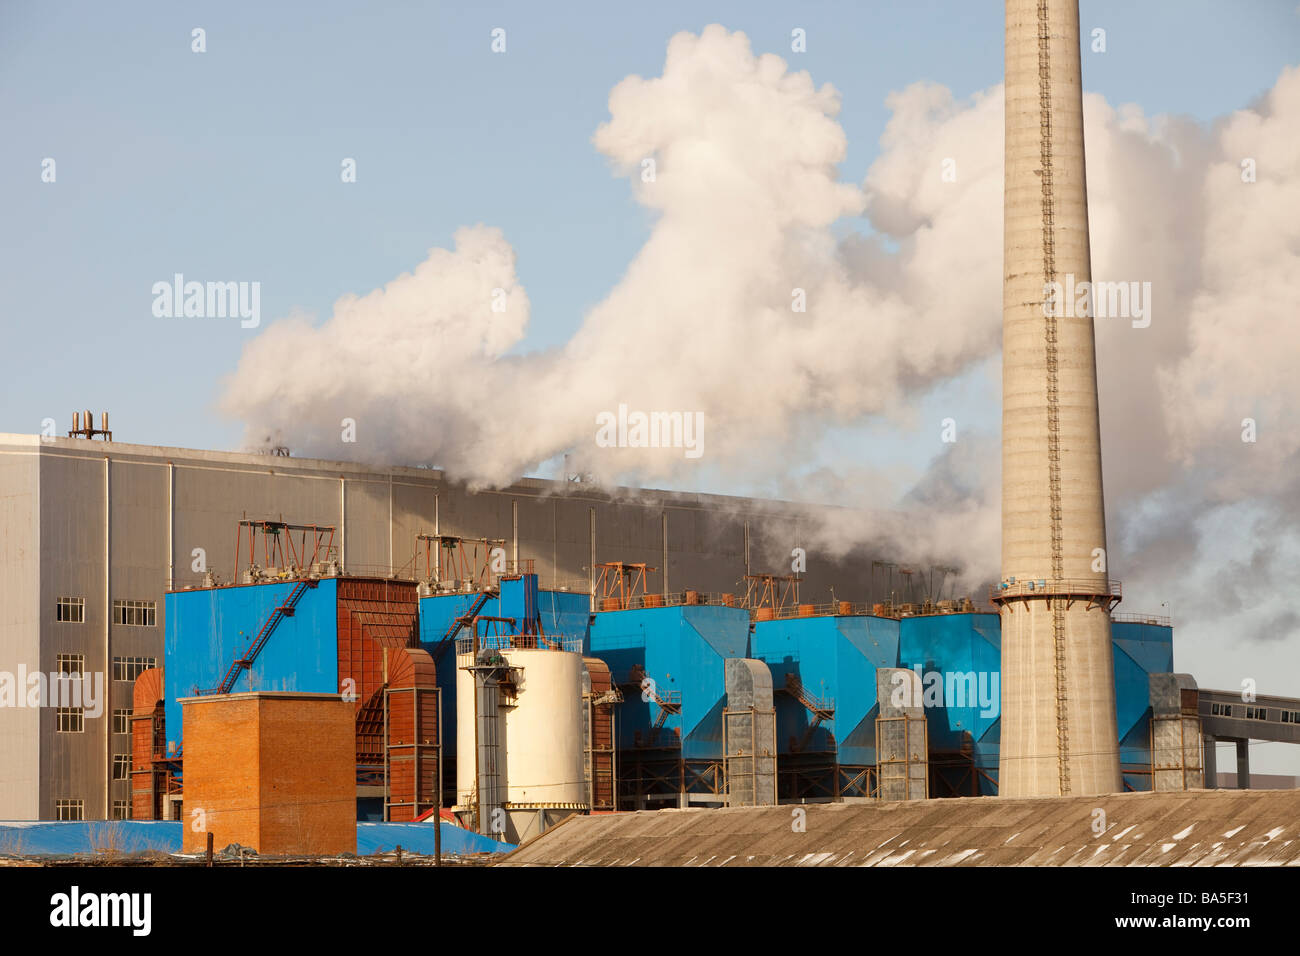 A coal fired power station in Suihua in Northern China Stock Photo